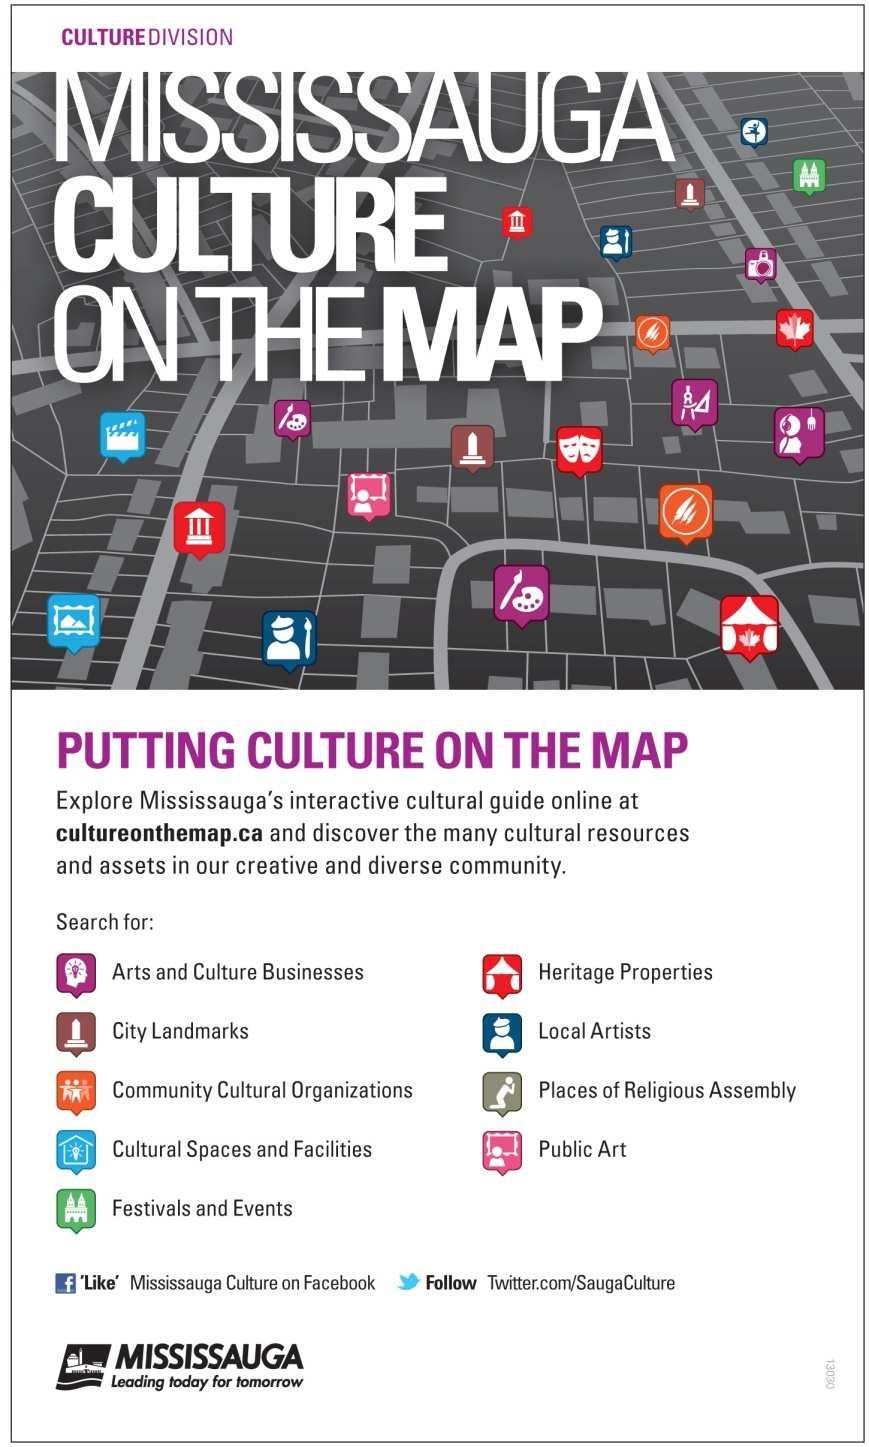 CULTURE ON THE MAP Applicants are encouraged to submit their organization s information and/or update any existing information, add photos and submit 2014 event information to